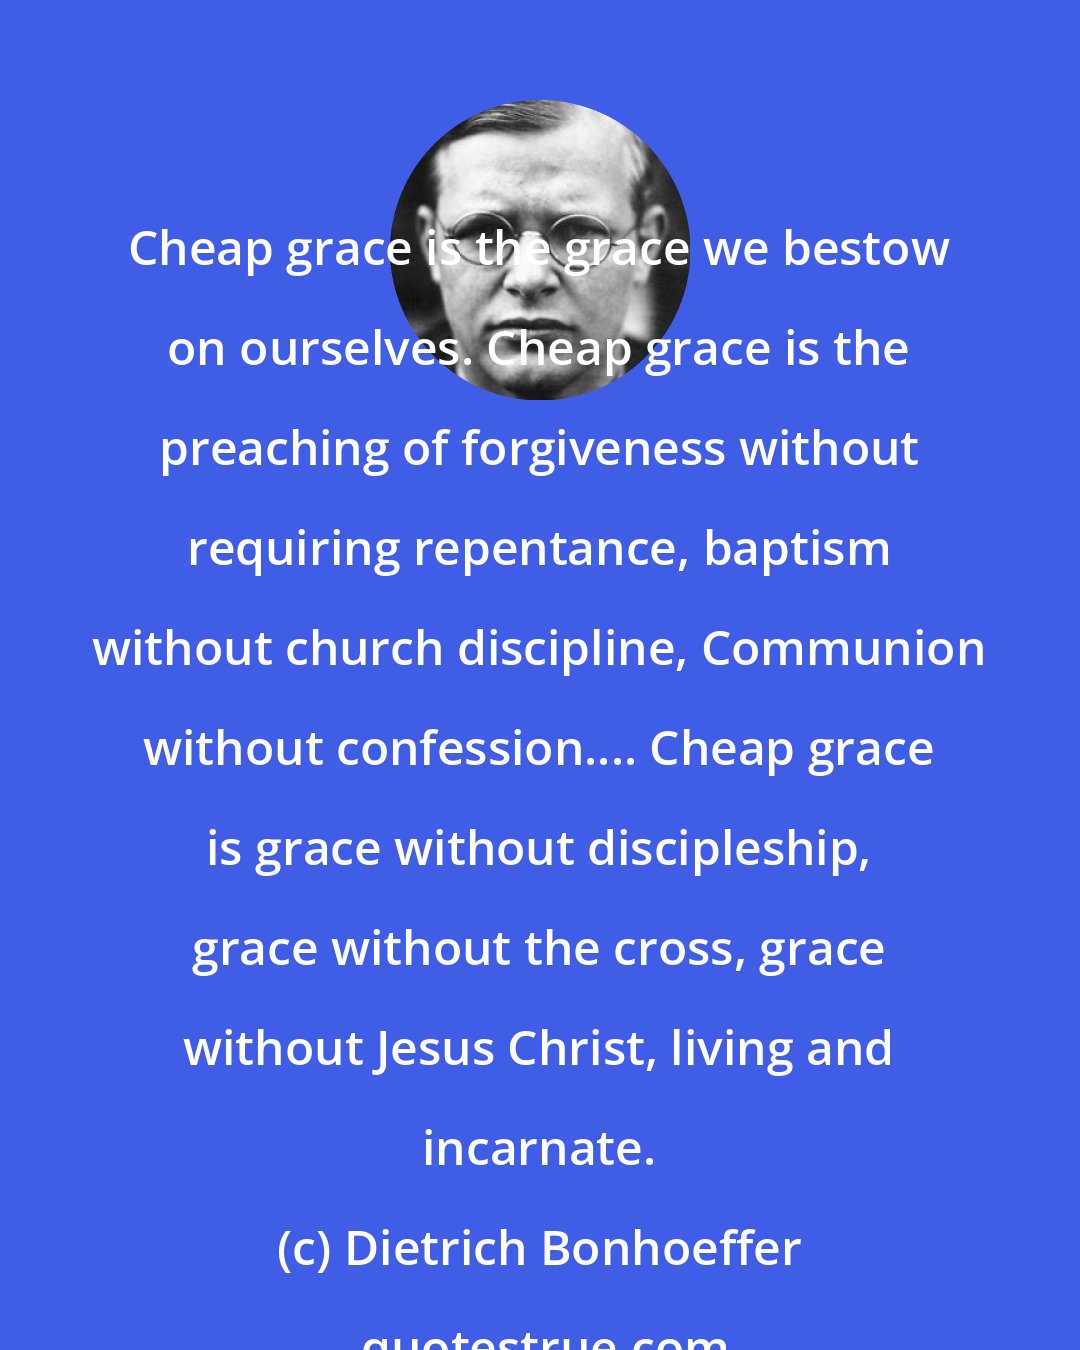 Dietrich Bonhoeffer: Cheap grace is the grace we bestow on ourselves. Cheap grace is the preaching of forgiveness without requiring repentance, baptism without church discipline, Communion without confession.... Cheap grace is grace without discipleship, grace without the cross, grace without Jesus Christ, living and incarnate.